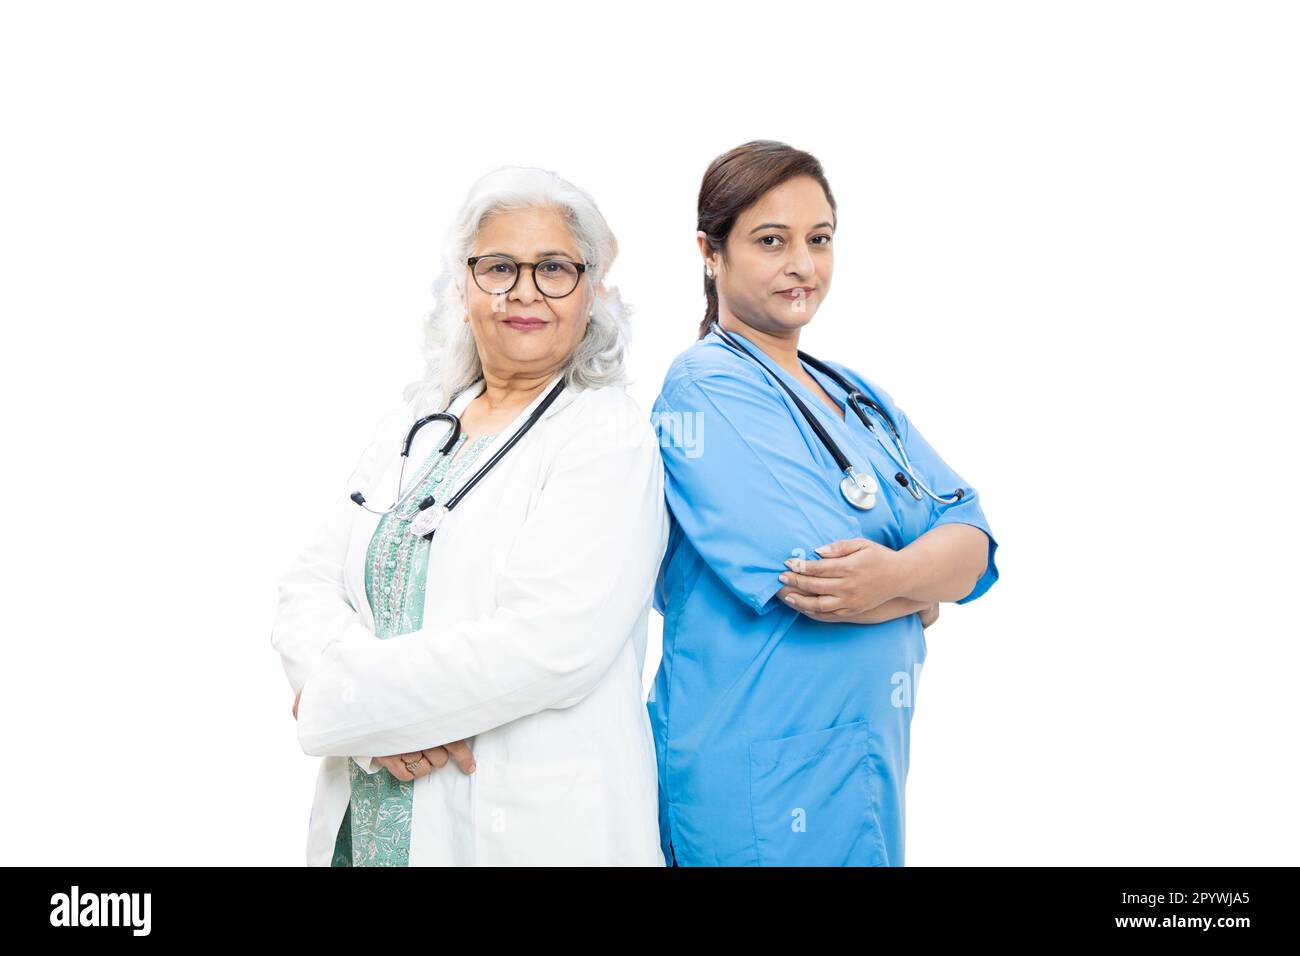 Portrait of senior indian female doctor and nurse with stethoscope standing isolated over white background, healthcare and medical concept. Stock Photo